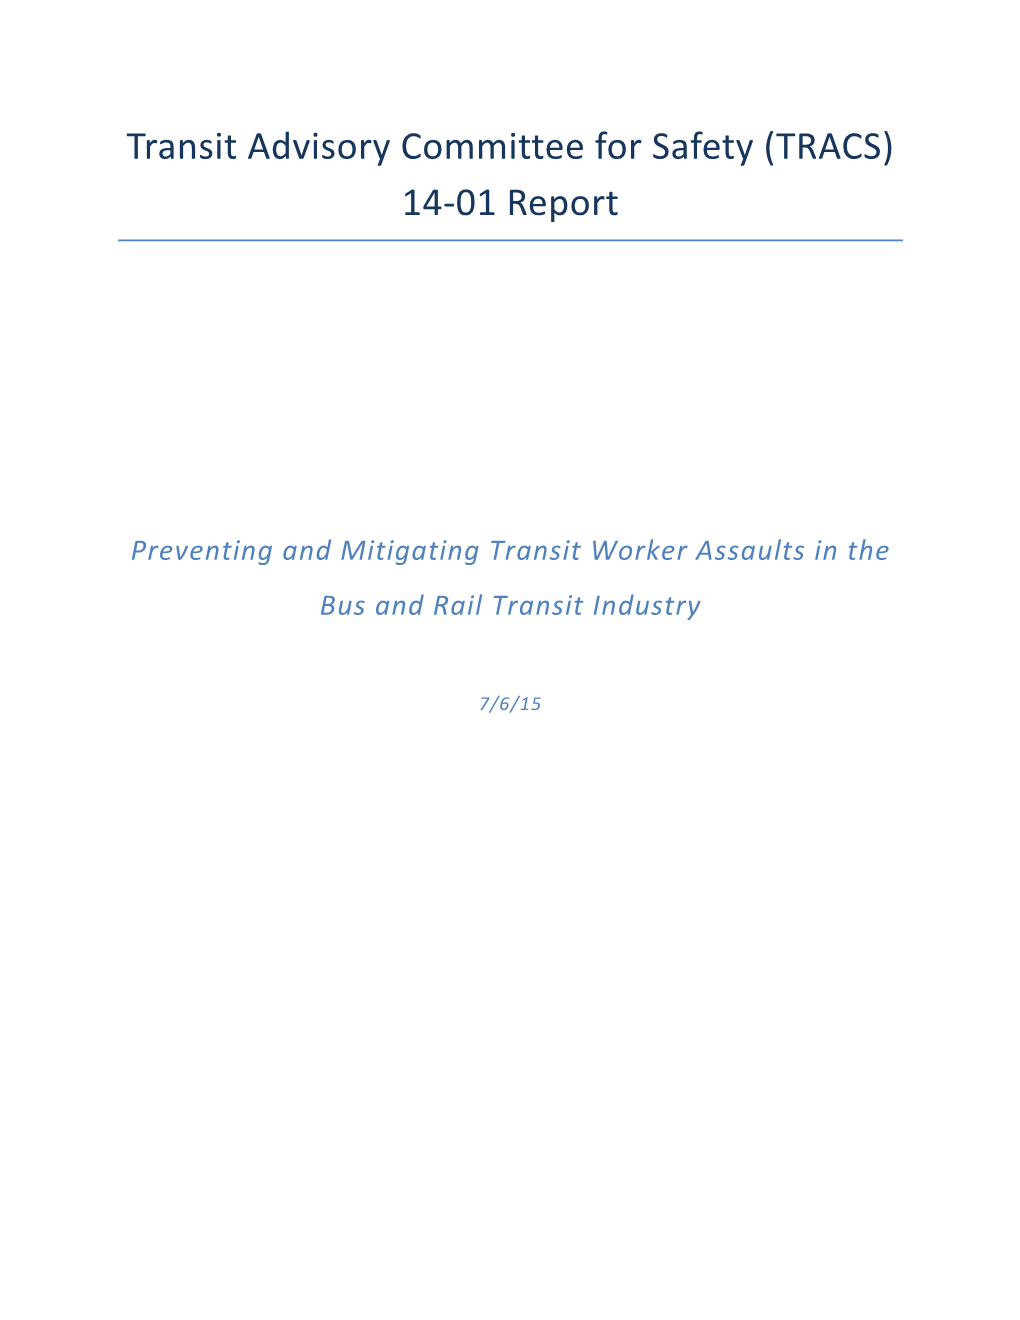 Preventing and Mitigating Transit Worker Assaults in the Bus and Rail Transit Industry